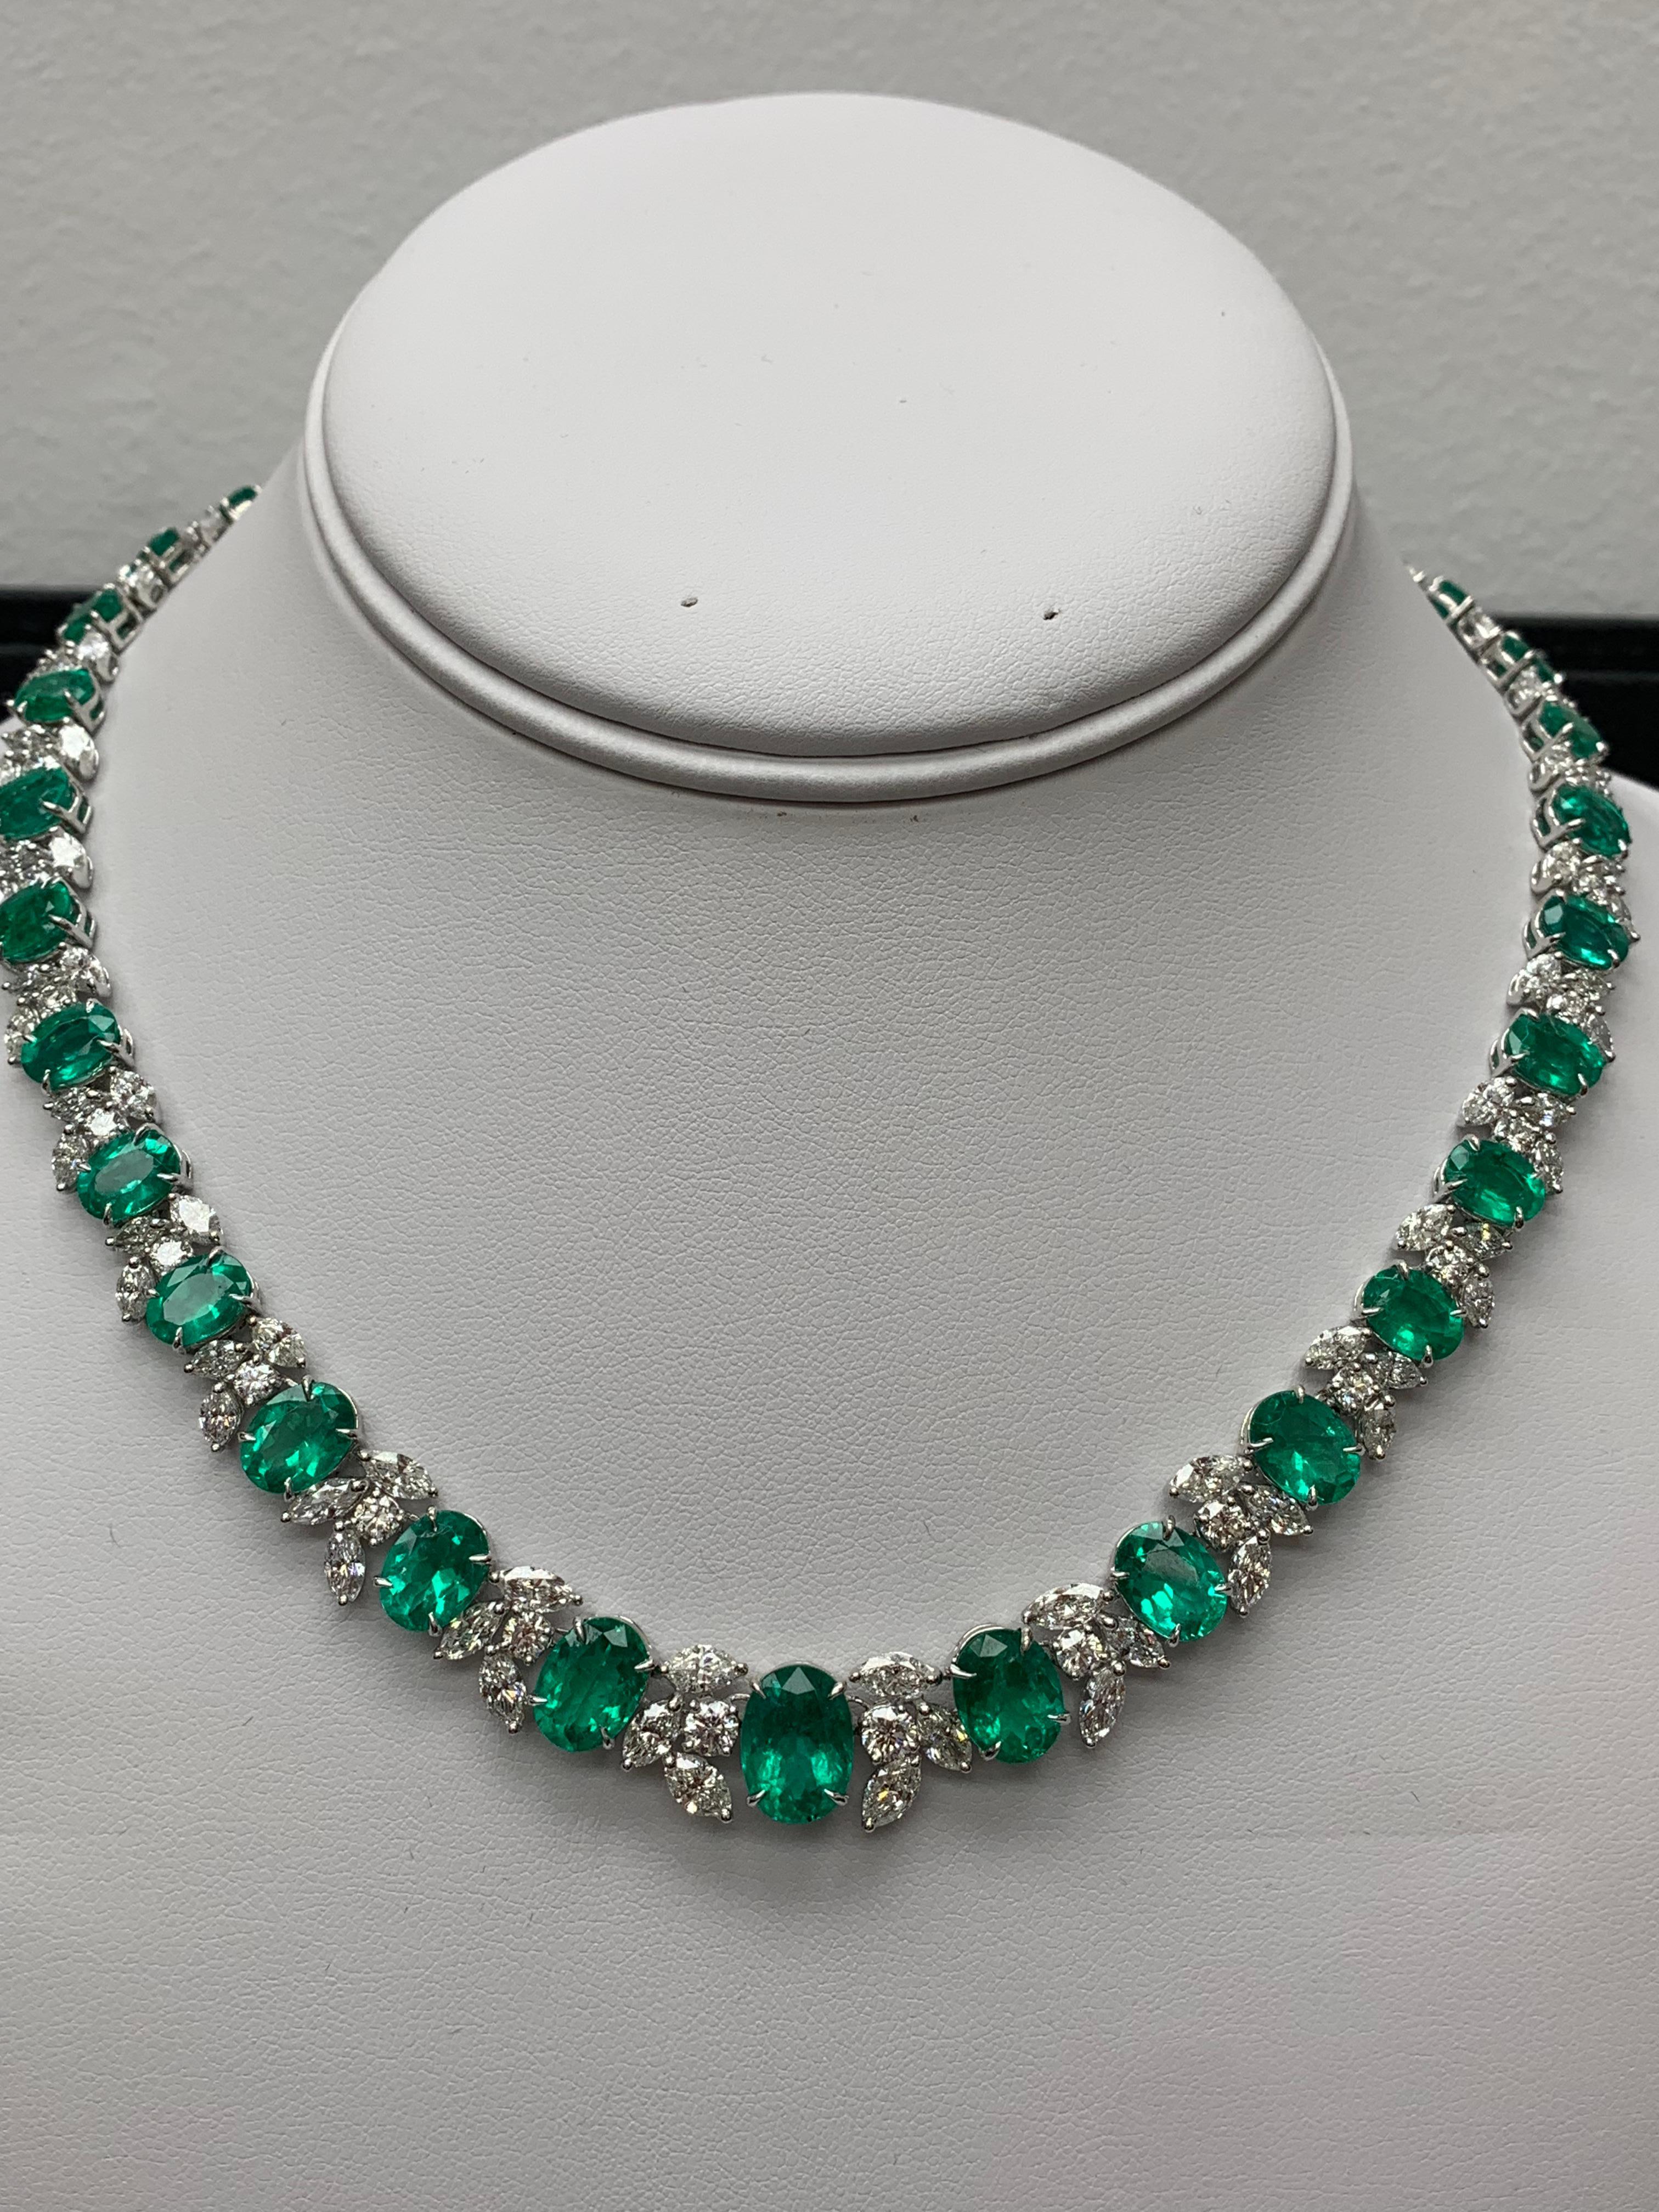 A spectacular piece of jewelry showcasing 36.87 carats of color-rich oval-cut emeralds that elegantly alternate with mixed-cut white diamonds. 108 marquise cut diamonds weigh 15.25 carats and 36 round diamonds weighing 3.79 carats in total. Each